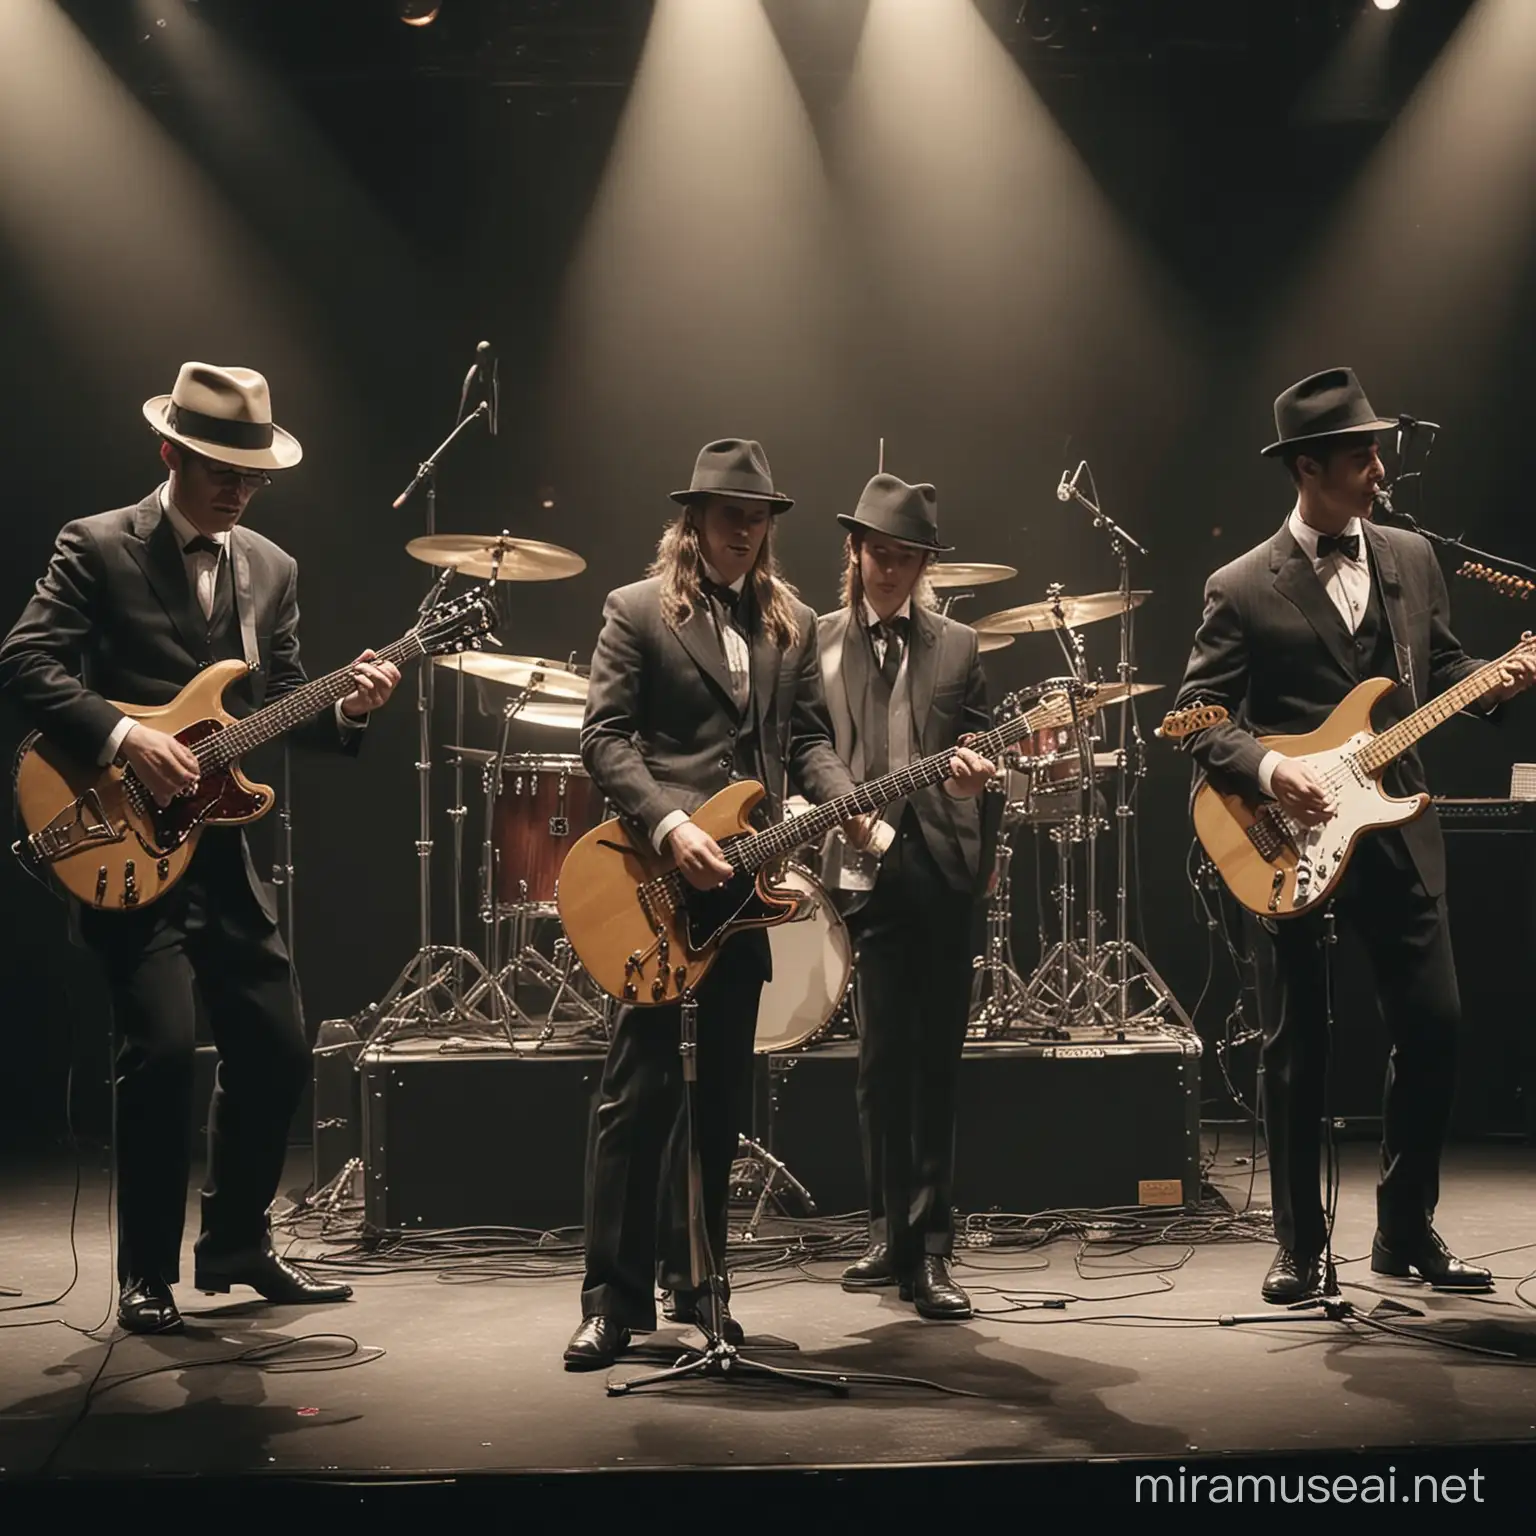 4 people old school, wearing fedora hat,  playing musical instruments guitar, drums, bass, piano surround the vocalist,close up, full body detiles from head to foot on the stage